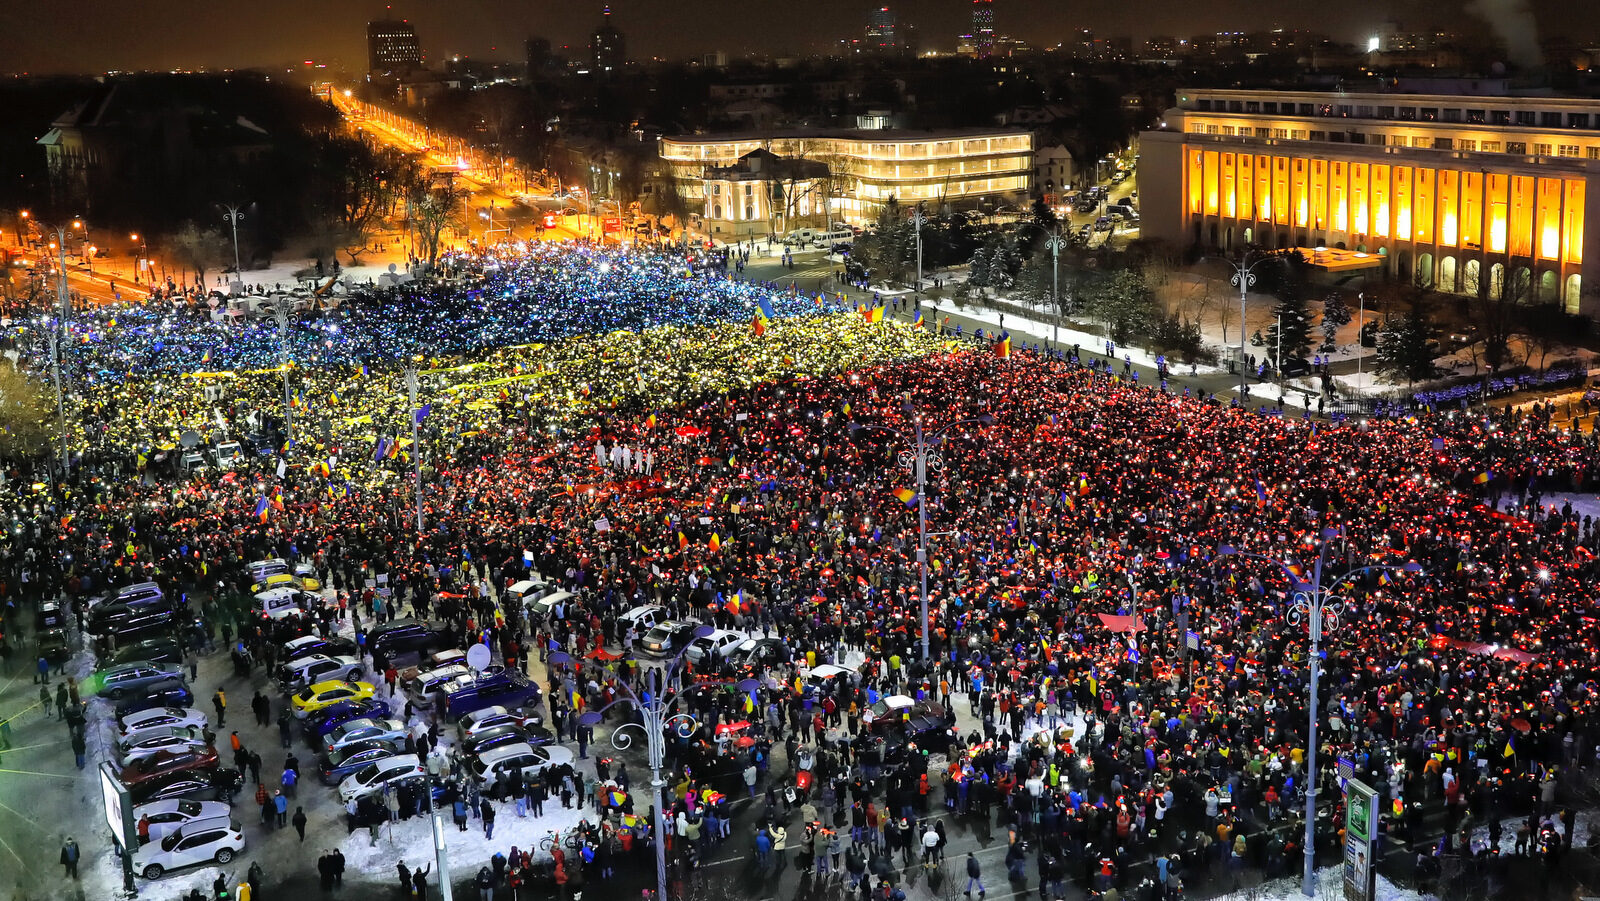 People light the flashes of their mobile phones in the colors of Romania's flag during an anti-government protest in Bucharest, Romania, Sunday, Feb. 12, 2017. Protesters braved freezing temperatures gathering outside the government headquarters for the 13th consecutive day to demand the government's resignation after it passed a decree that would have diluted the anti-corruption fight that has targeted top officials.(AP/Vadim Ghirda)